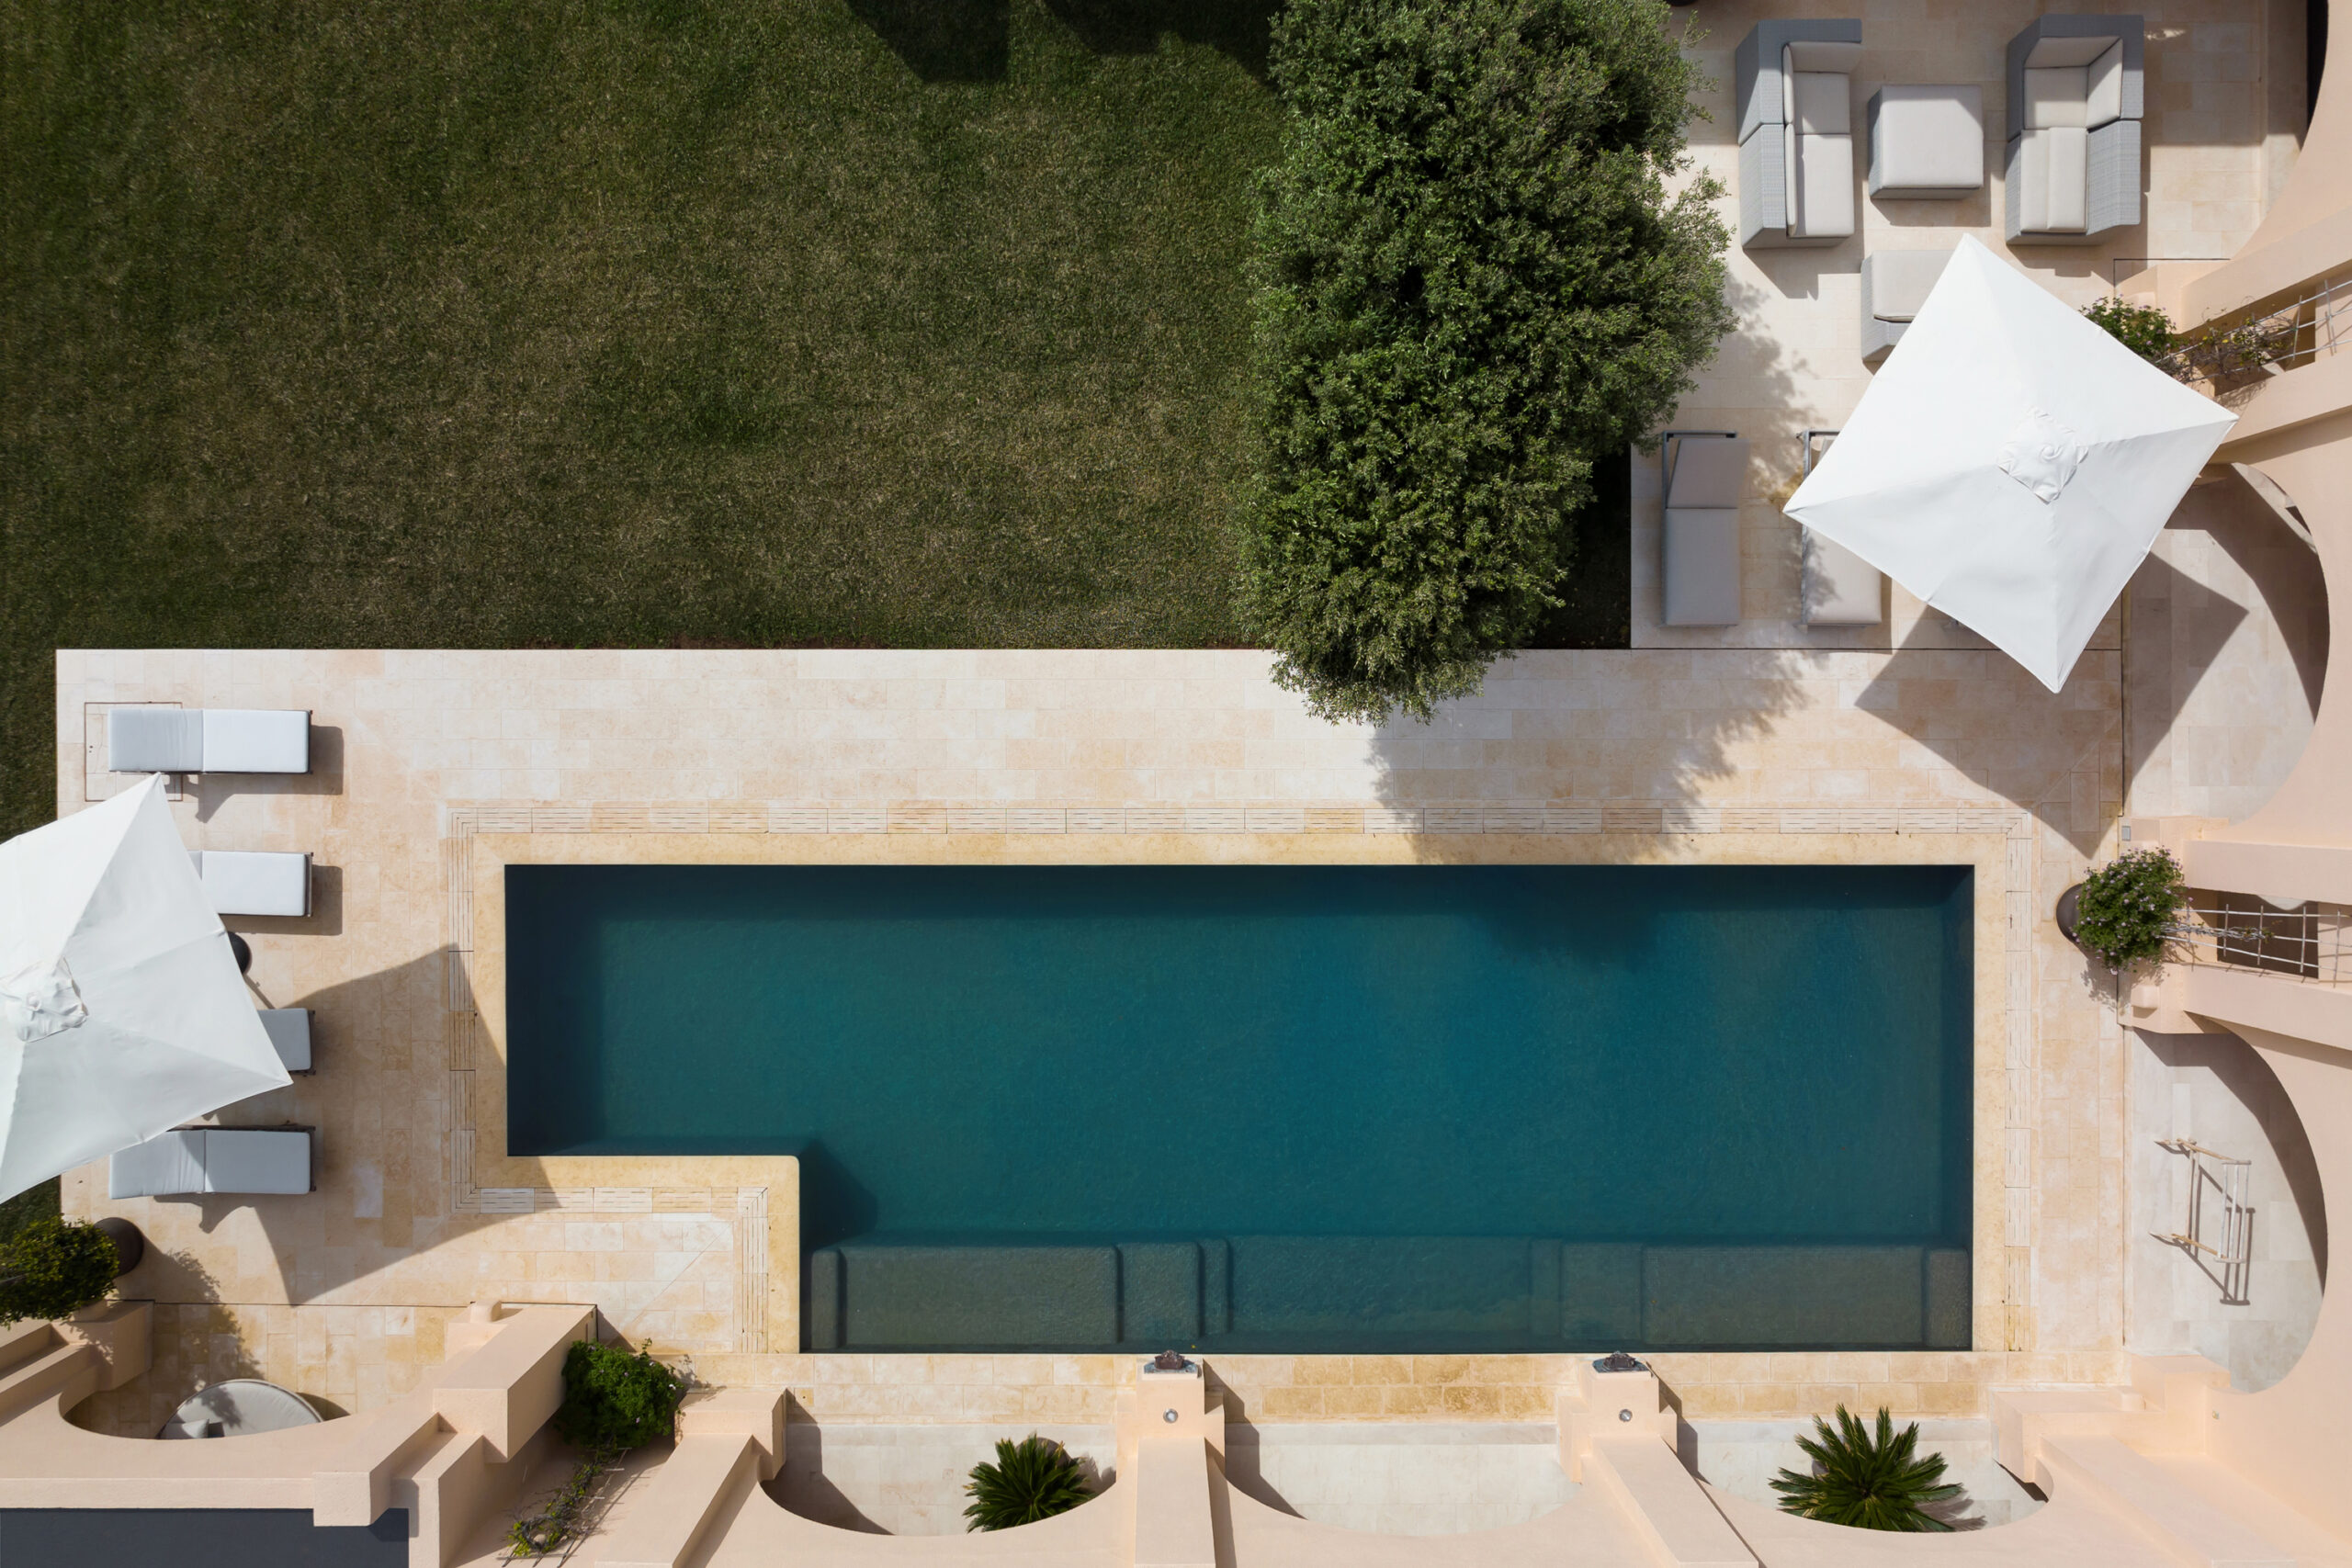 Bird's eye view of a swimming pool at a luxury villa in Ibiza